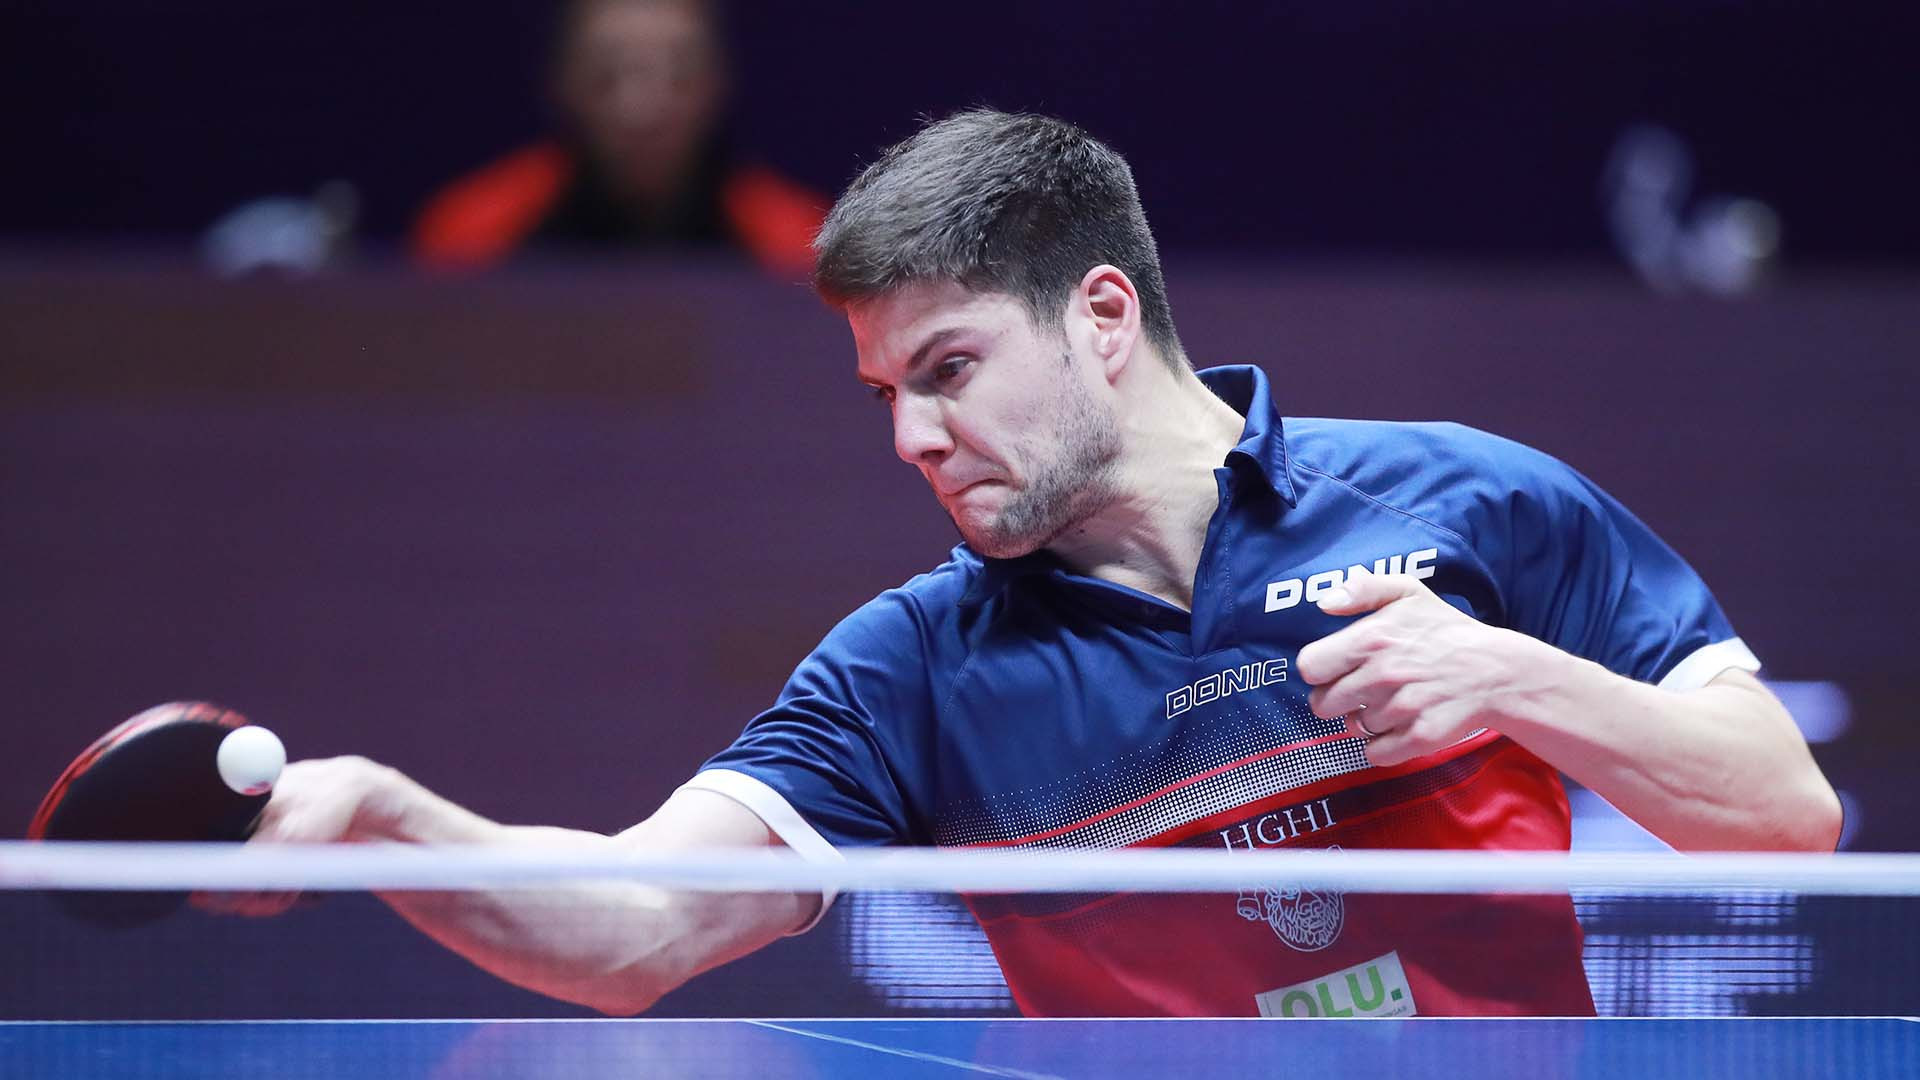 Ovtcharov earns place in men's singles final at ITTF World Tour Grand Finals